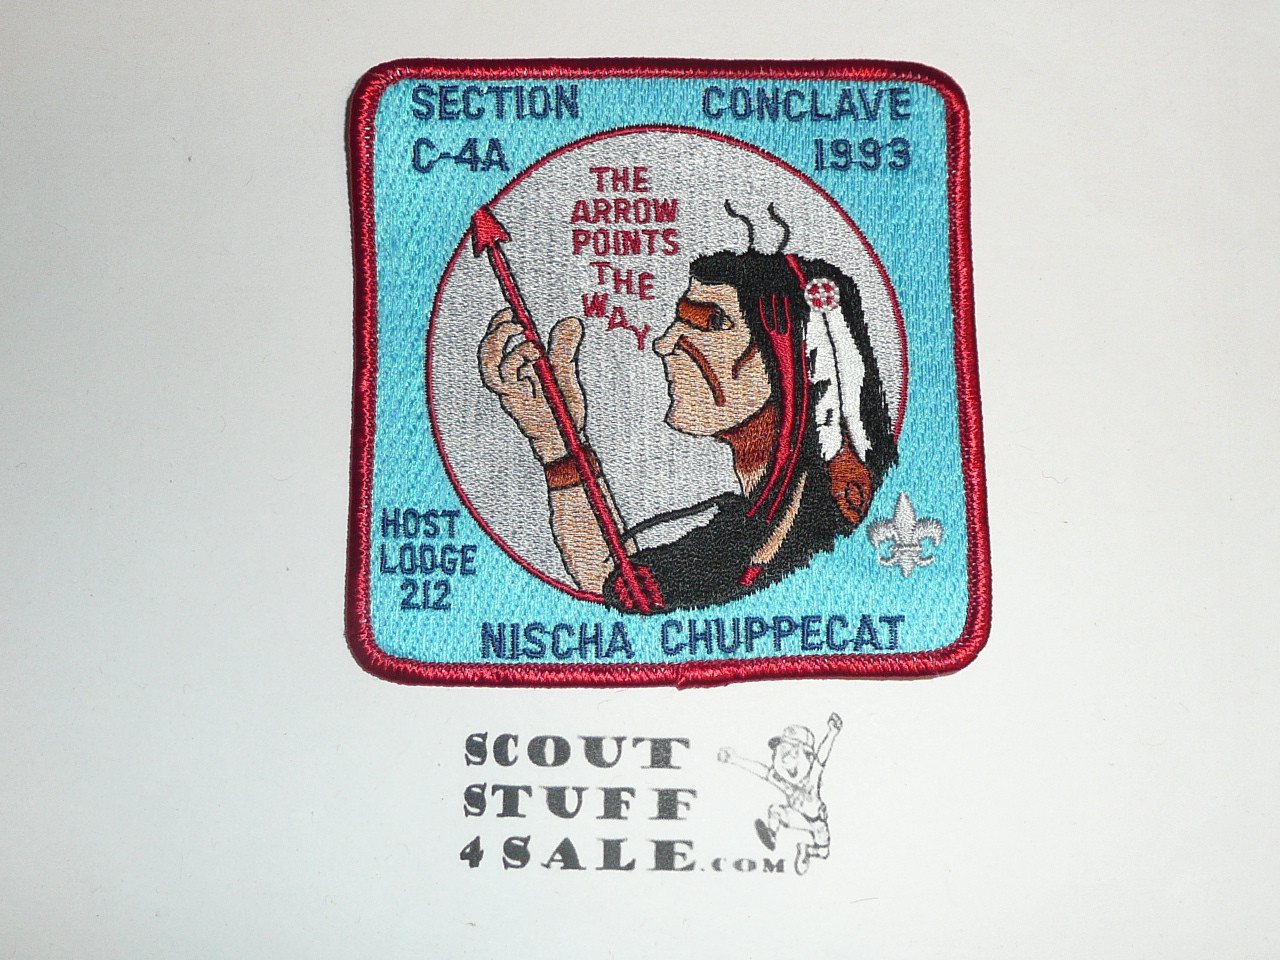 Section C-4A 1993 O.A. Conference Patch - Scout